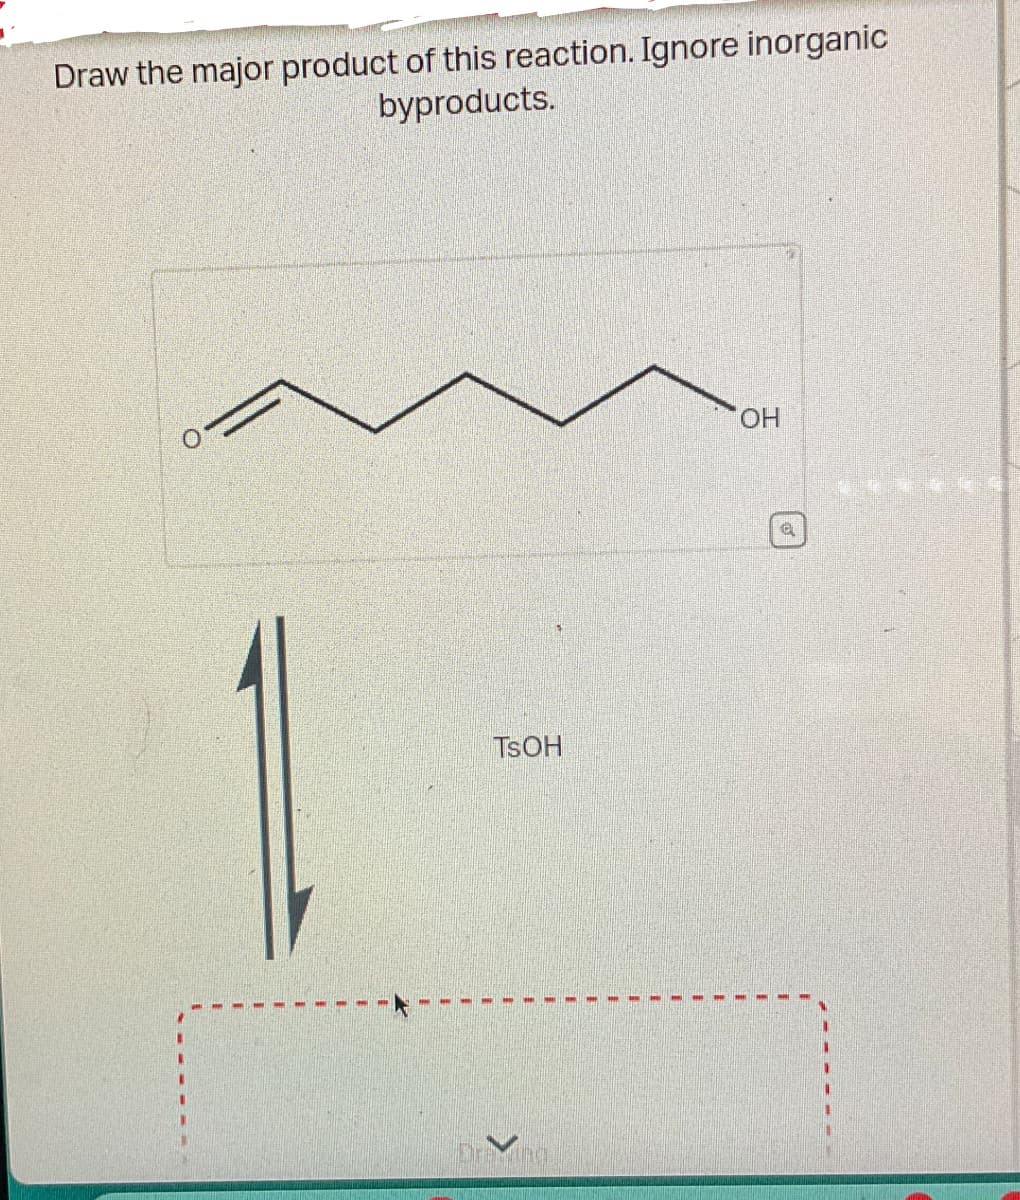 Draw the major product of this reaction. Ignore inorganic
byproducts.
TsOH
Drawing
OH